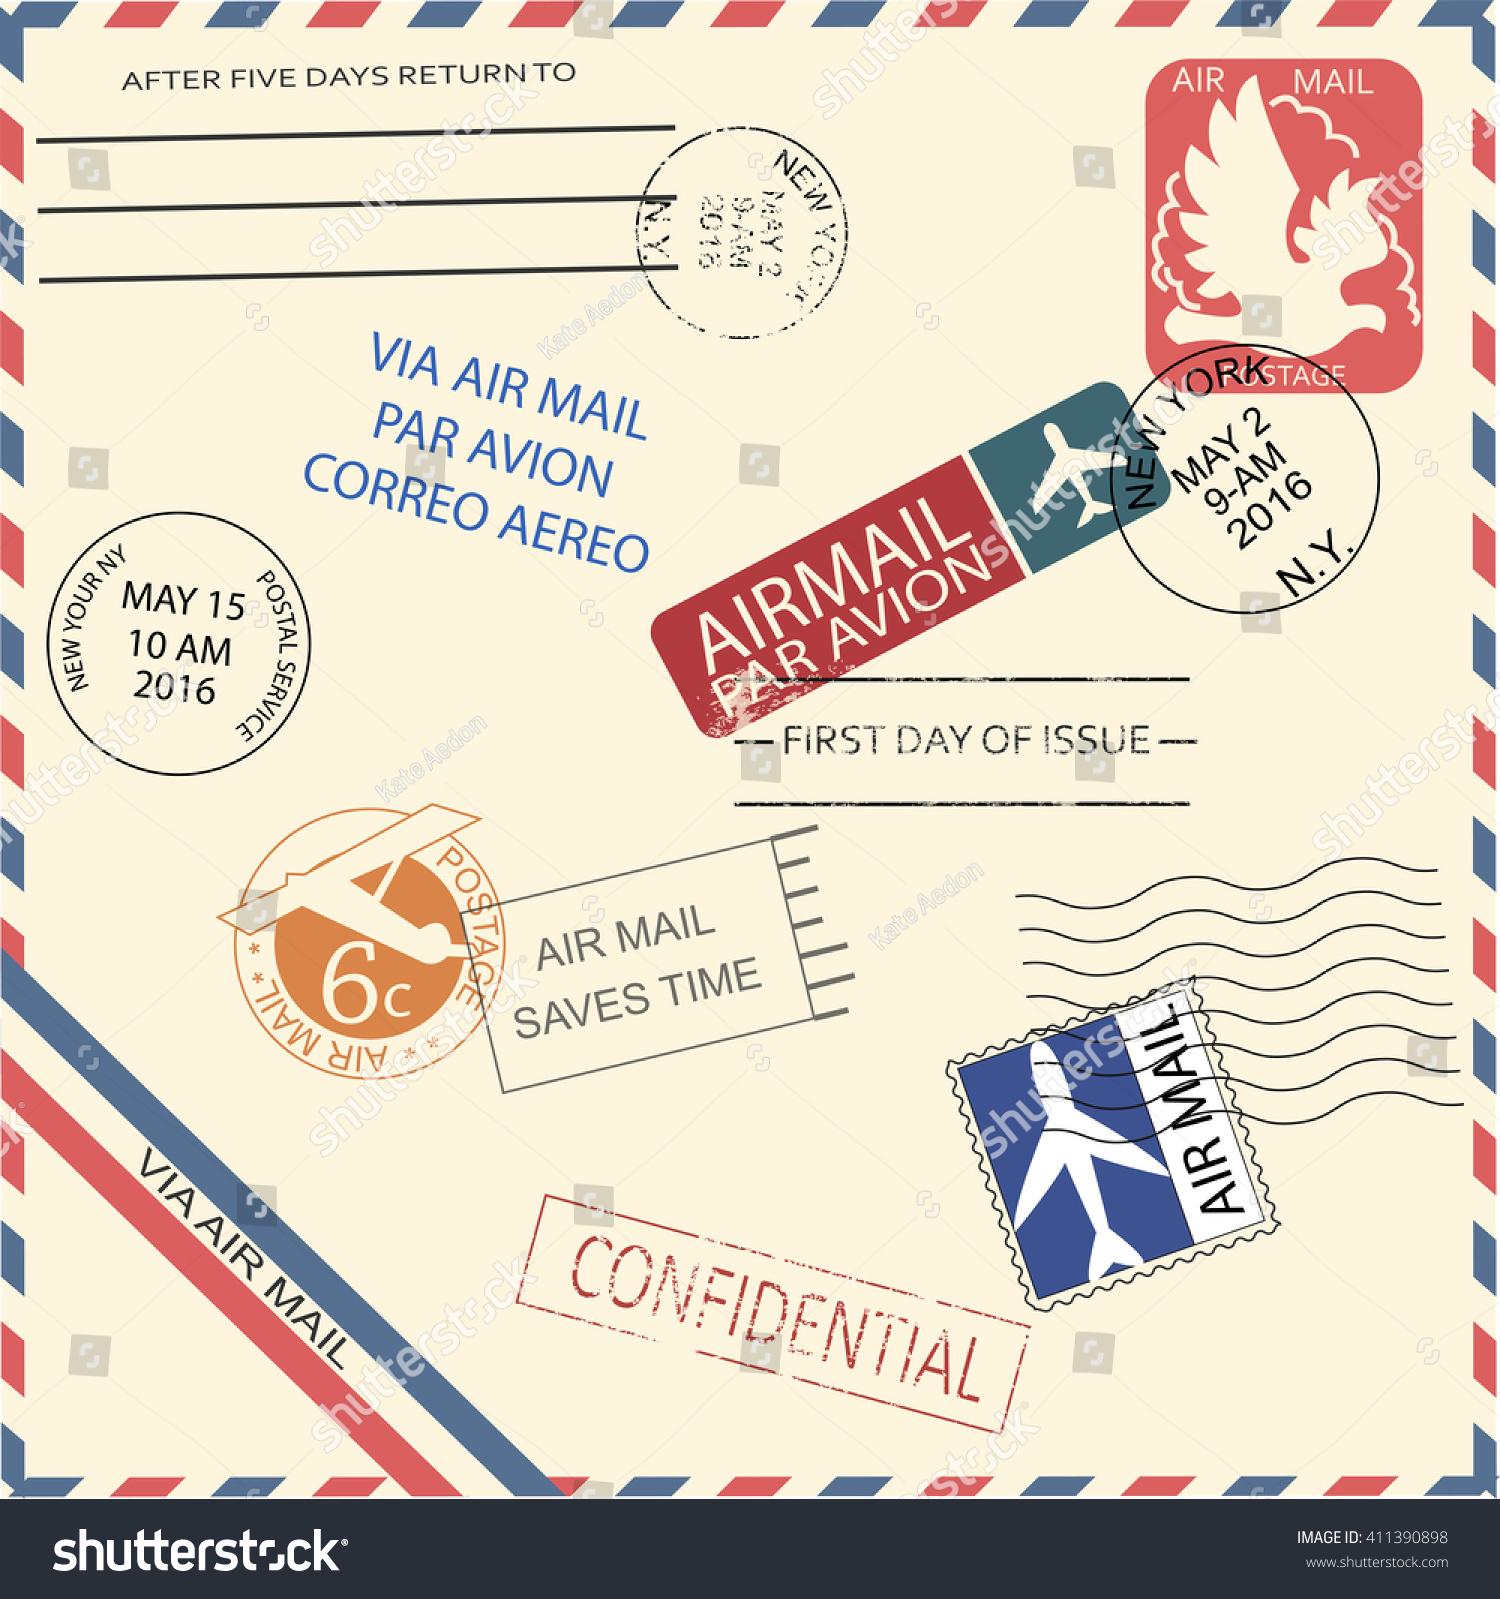 Vintage Air Mail Envelope With Stamps, Marks And Postal Elements. Cool ...